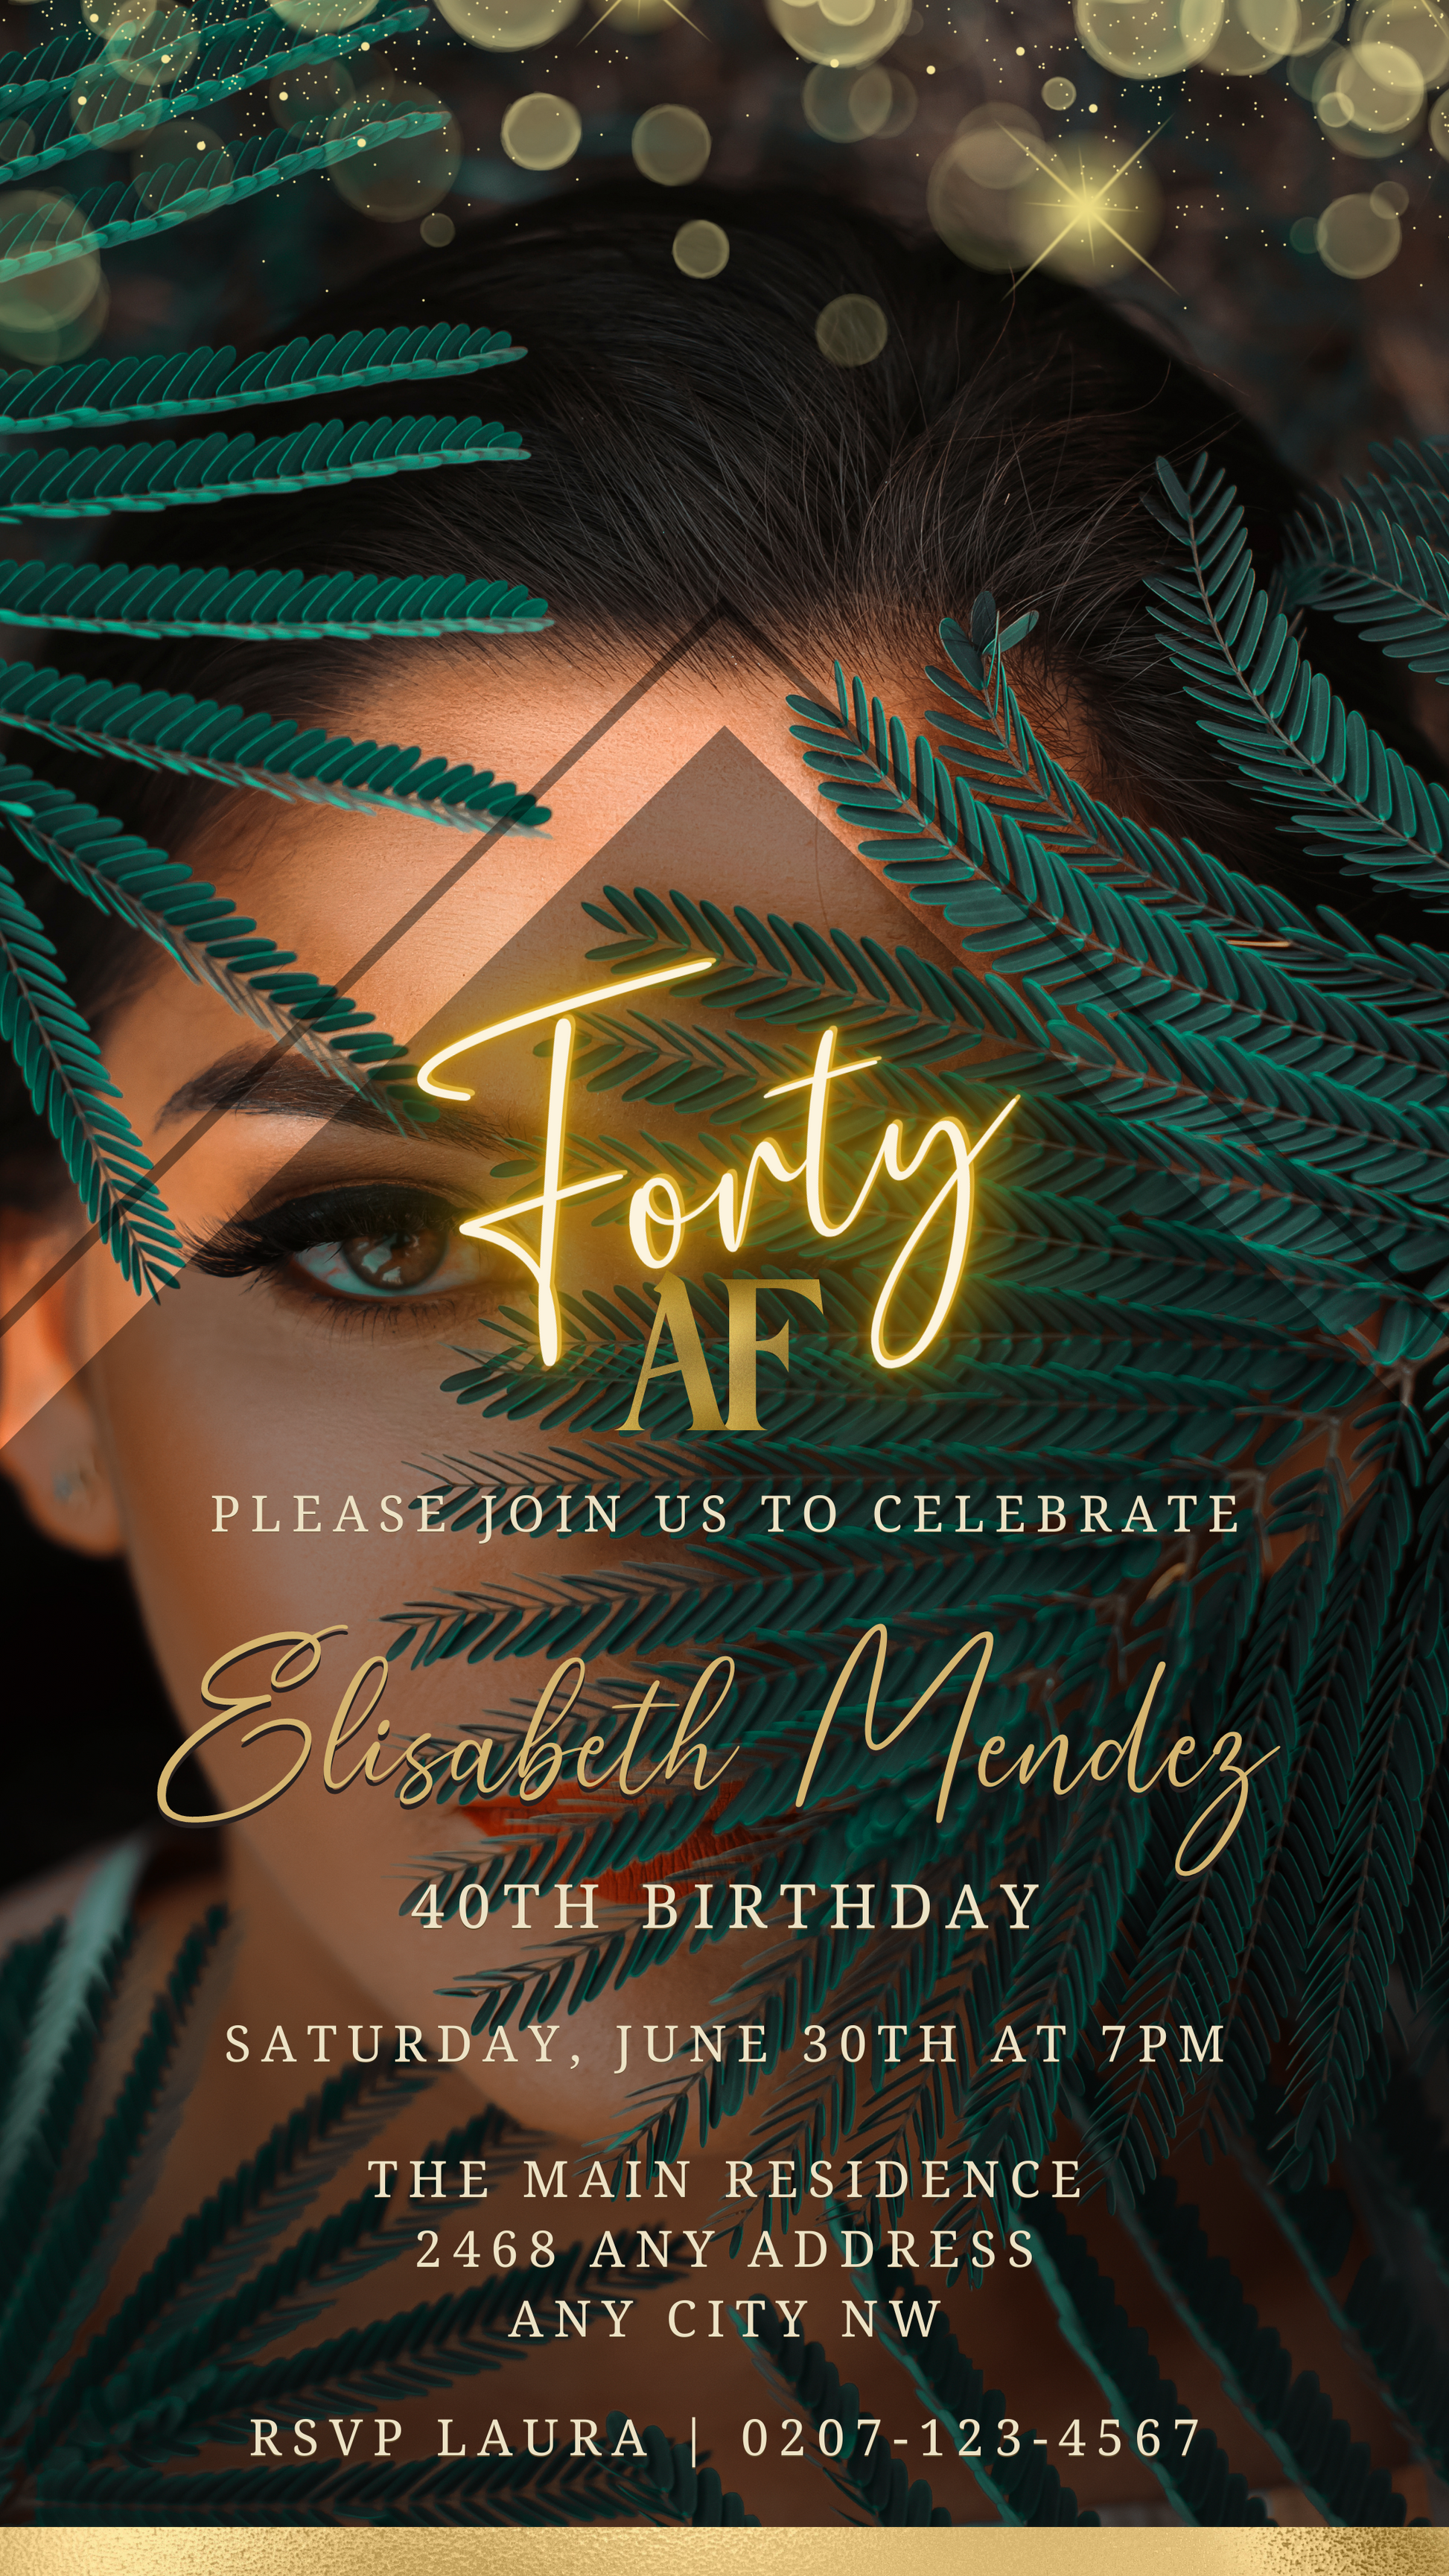 Woman's face framed by leaves, promoting customizable Photo Background Gold | 40AF Birthday Evite, a DIY digital invitation template for personalizing with Canva.